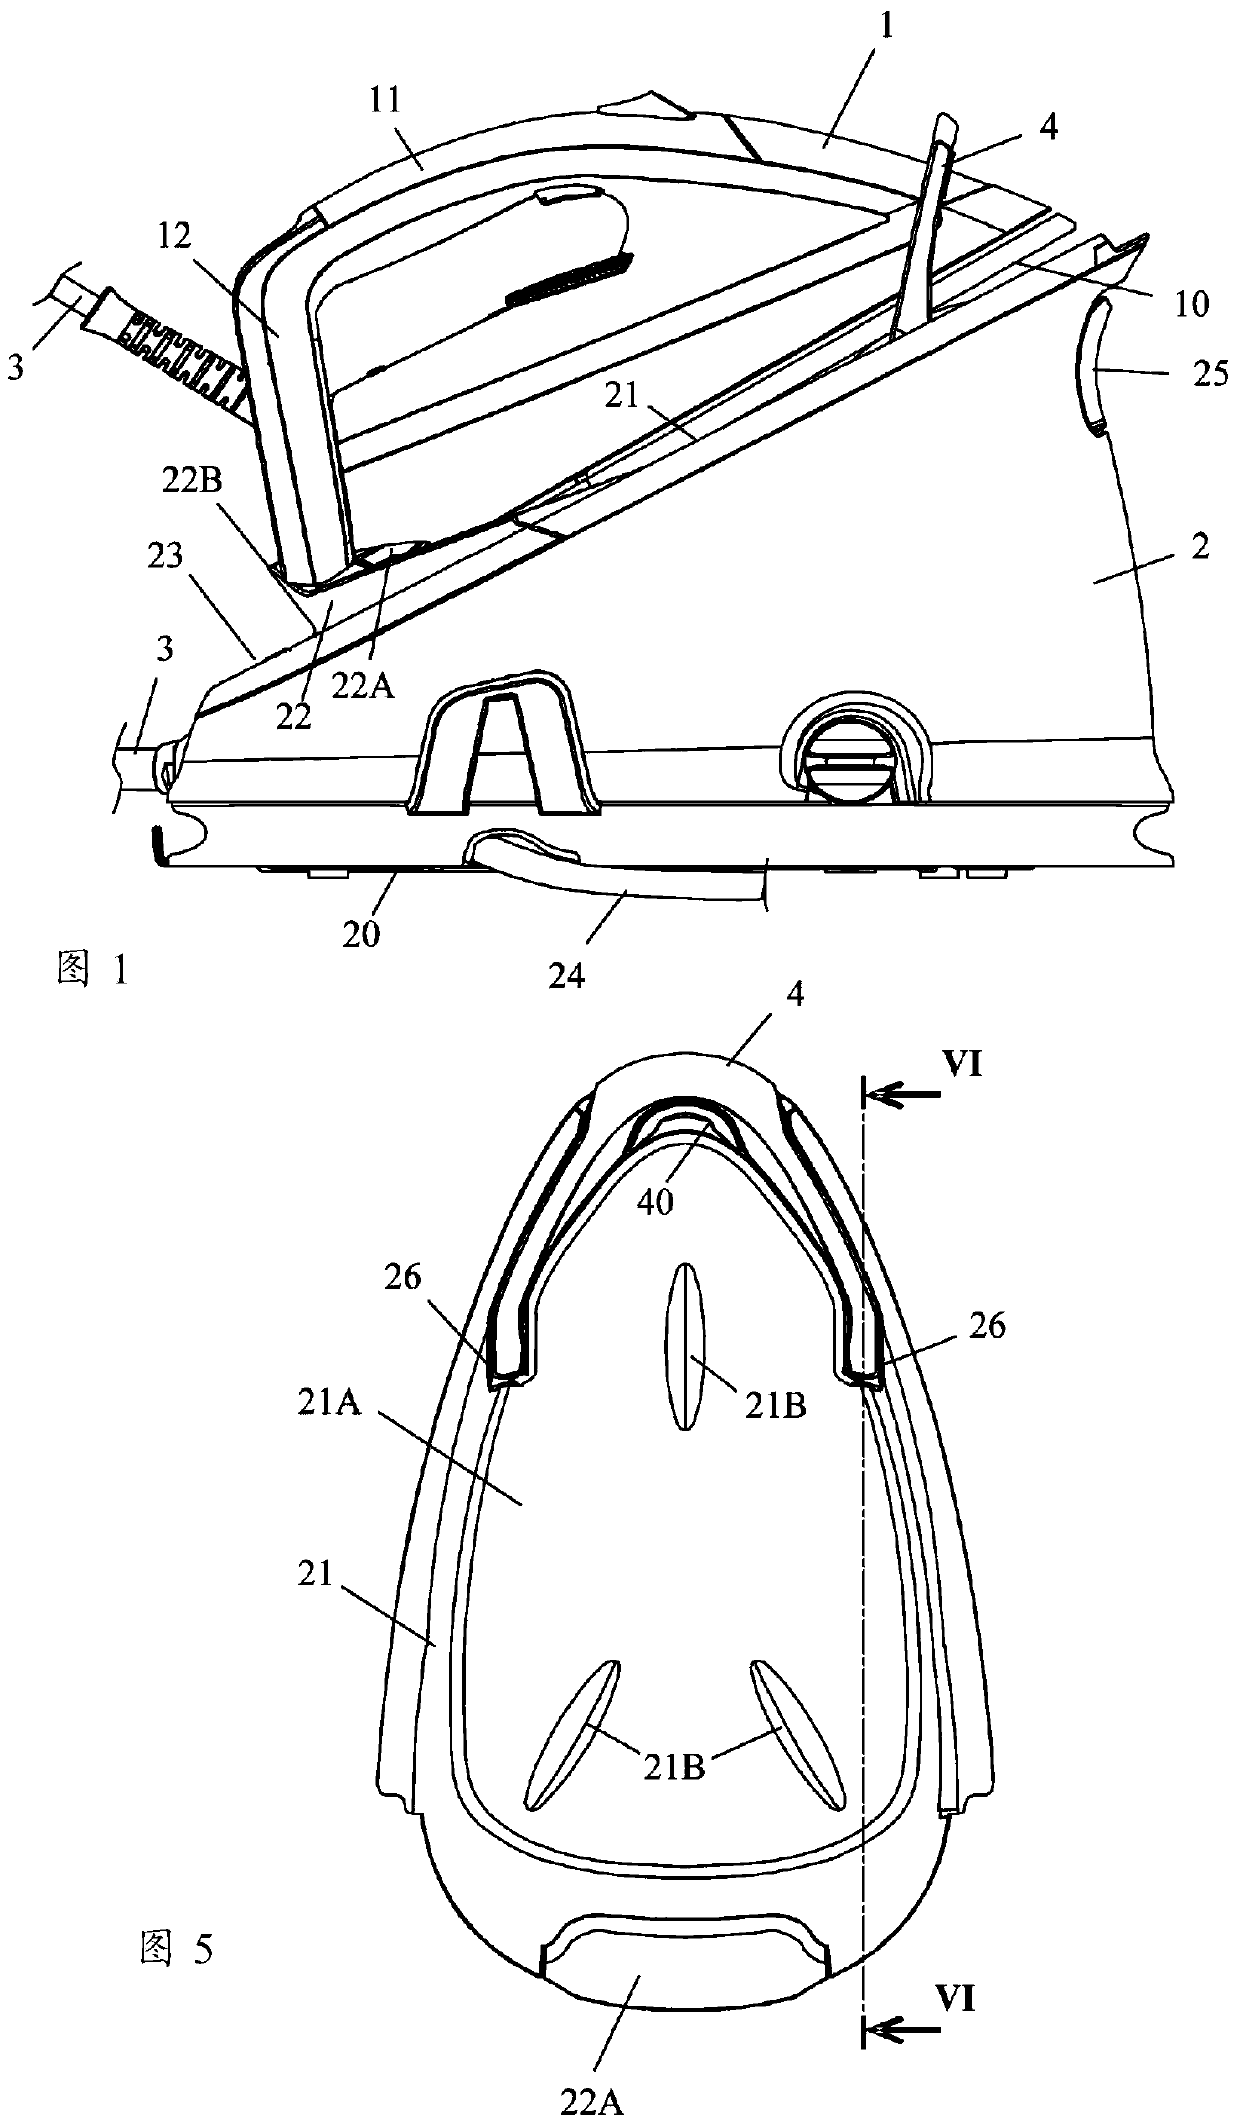 Home appliance comprising an iron and a portable base having a place for the iron